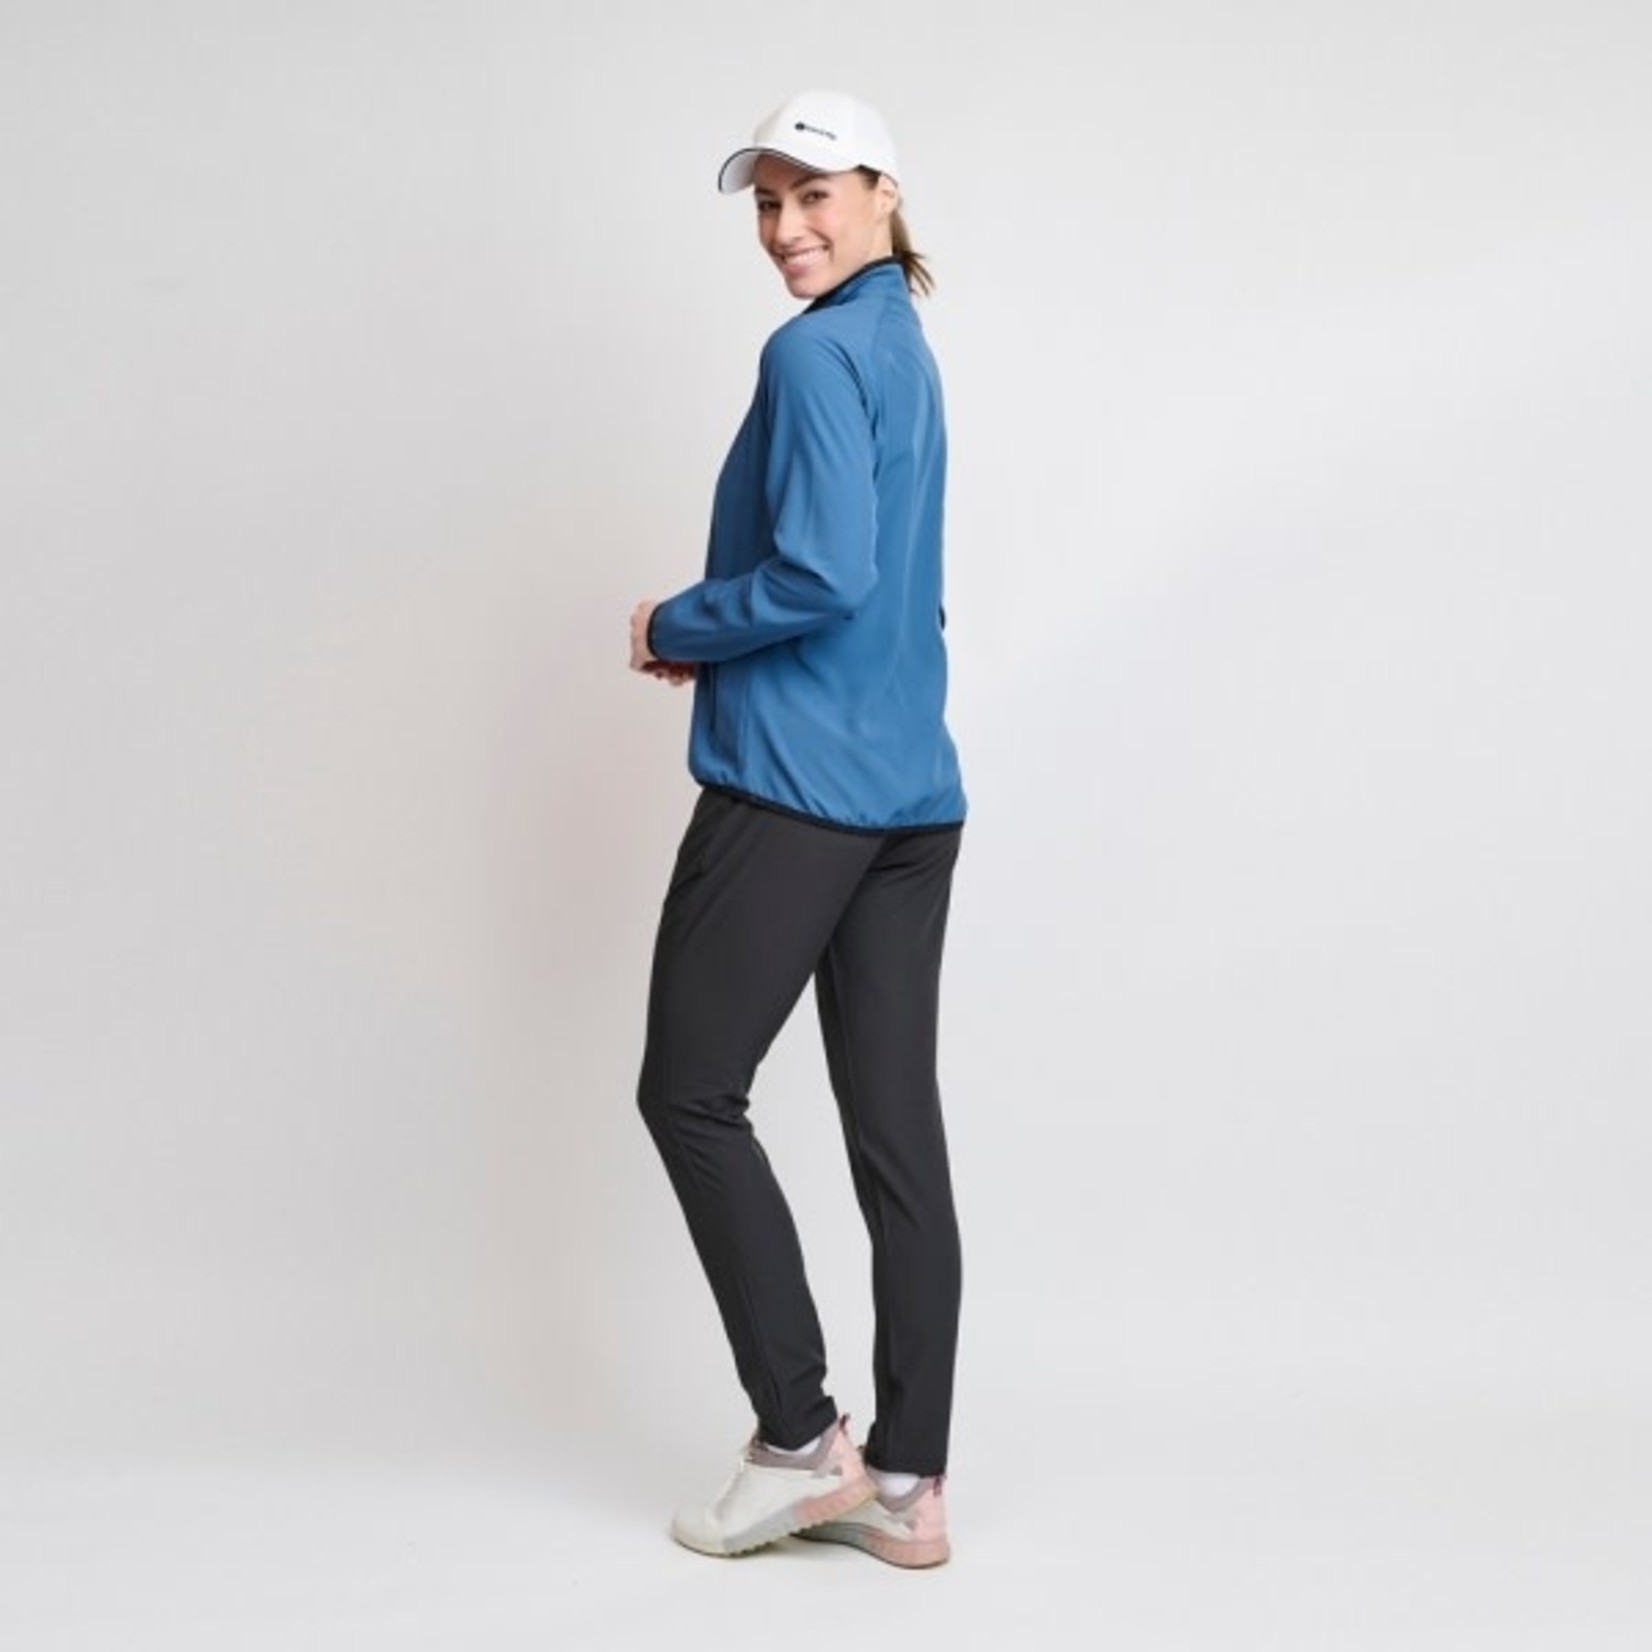 Backtee Backtee Ladies 80G Packable Shield - ENSIGN BLUE